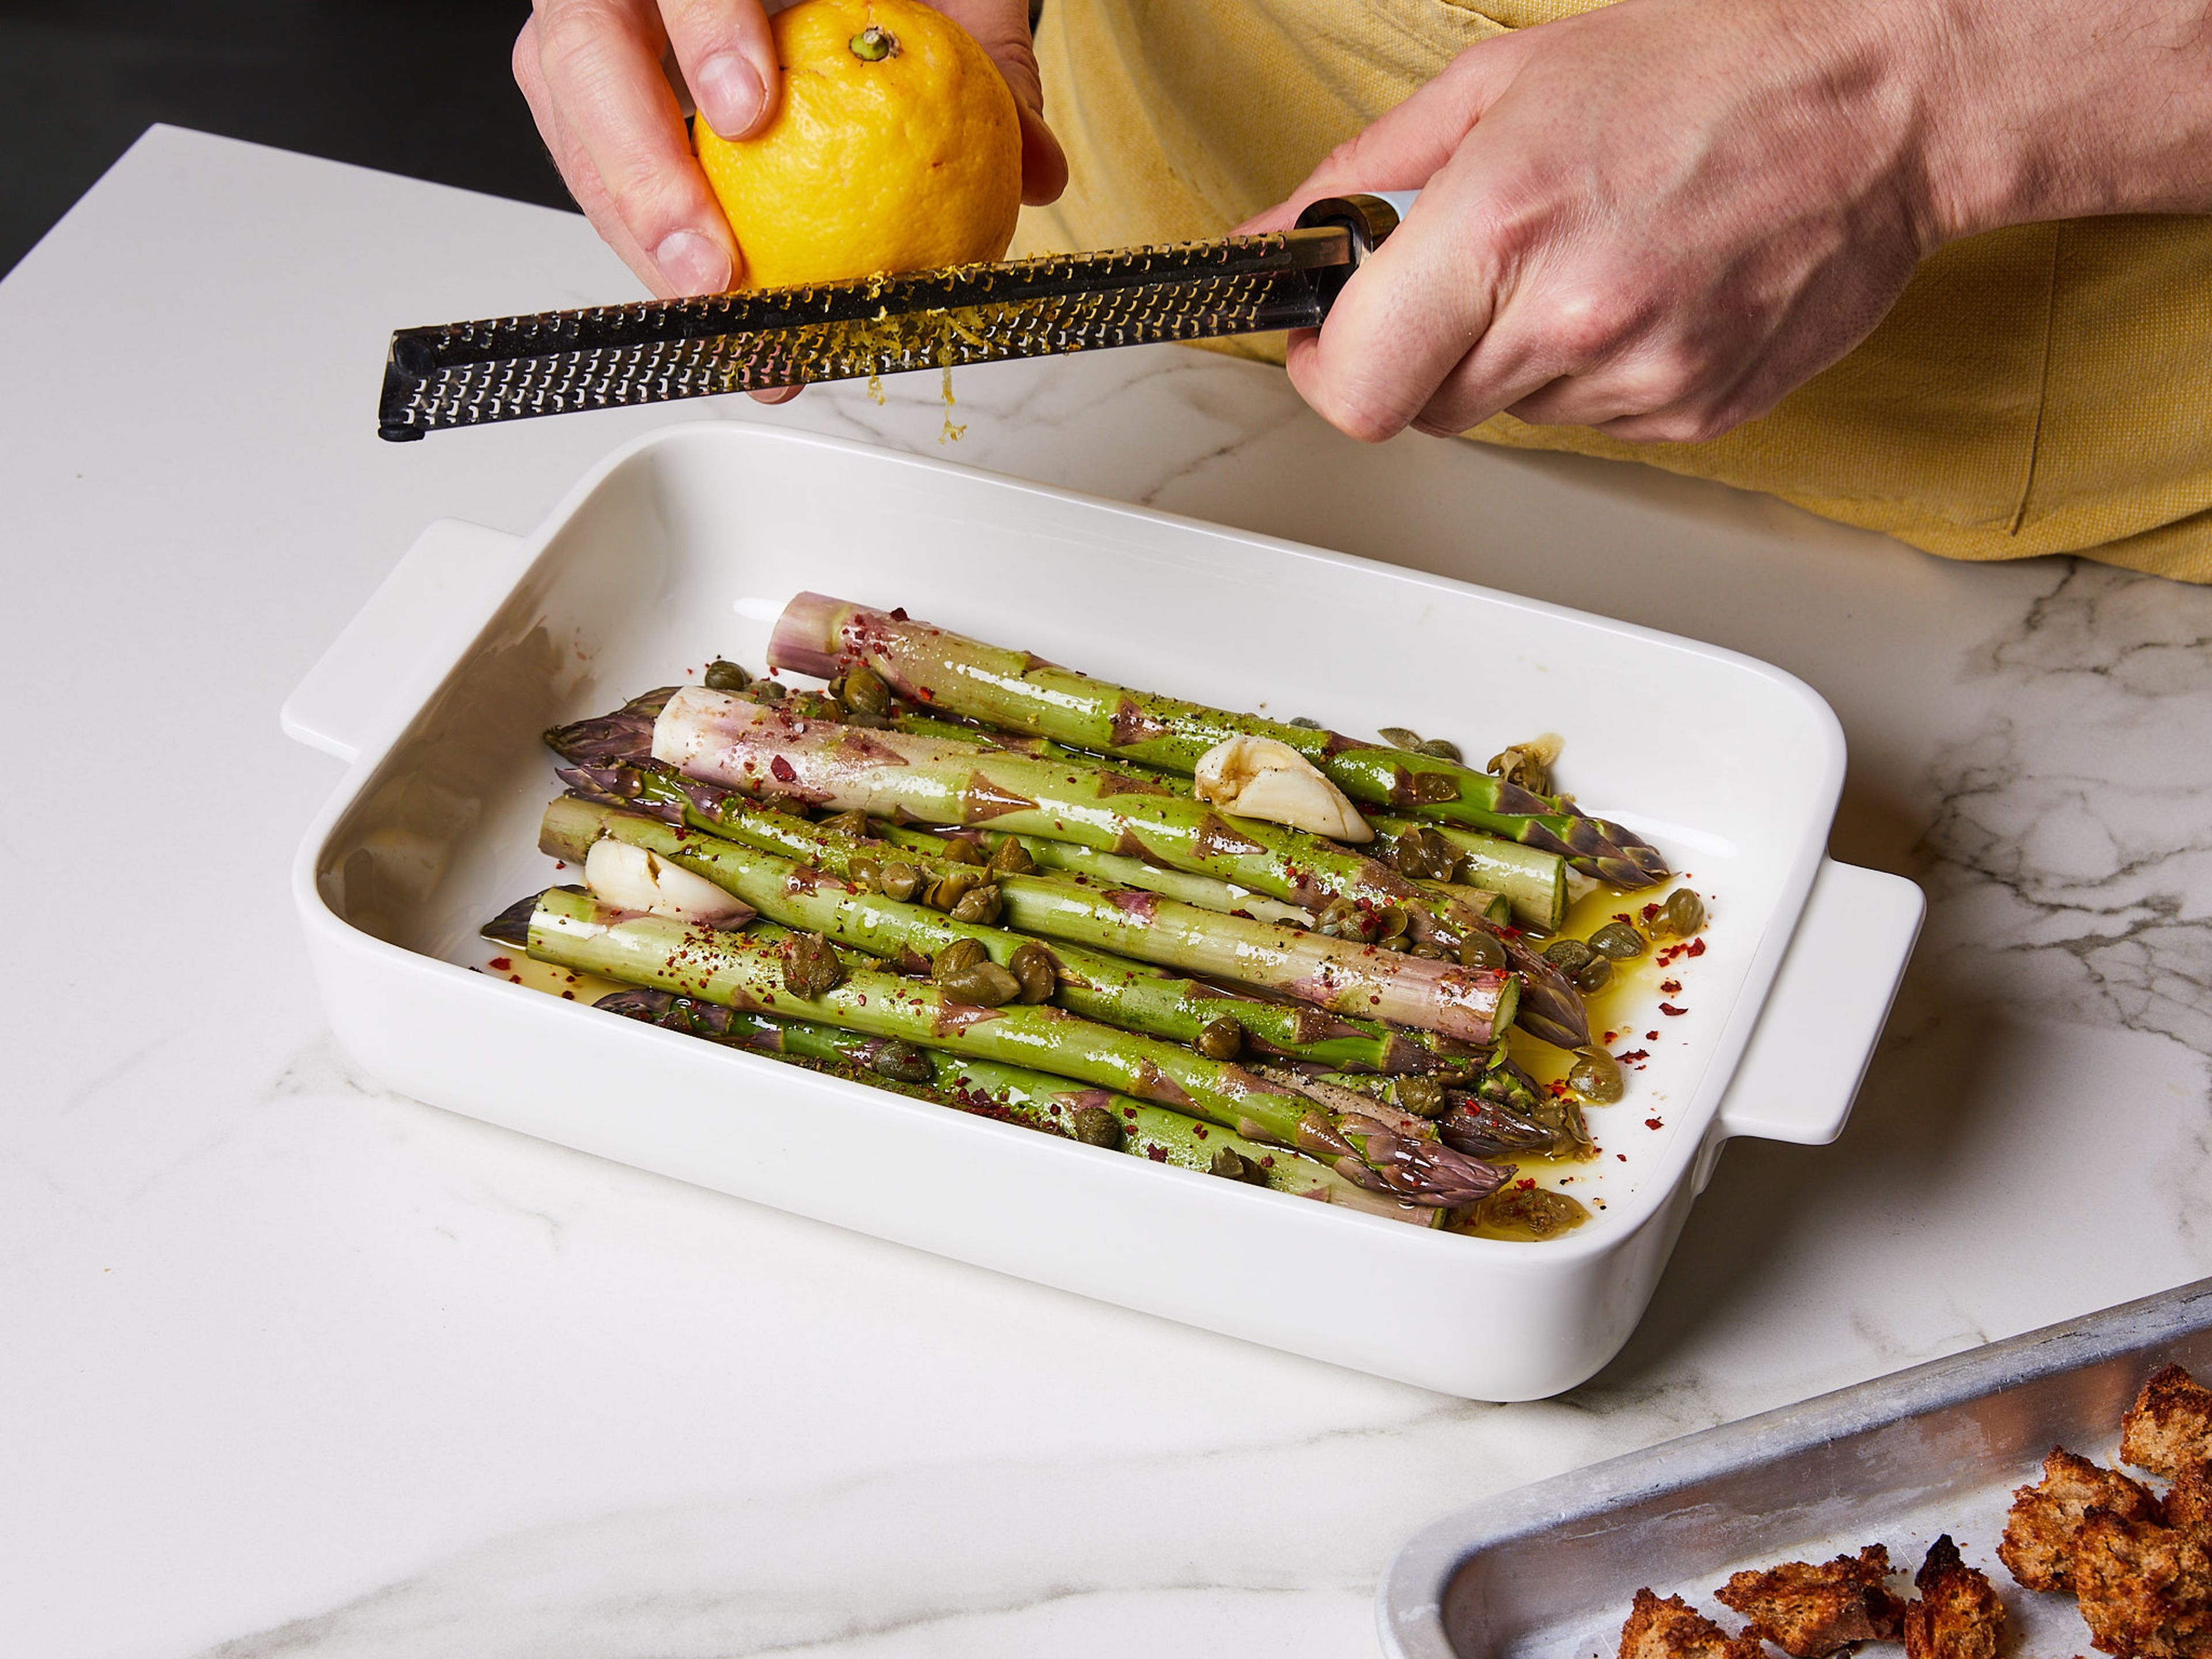 Mix olive oil, asparagus, capers, lemon zest, garlic, chili flakes, salt, and pepper in a baking dish. Place in the oven to roast for approx. 18–24 min. until the asparagus is lightly browned.